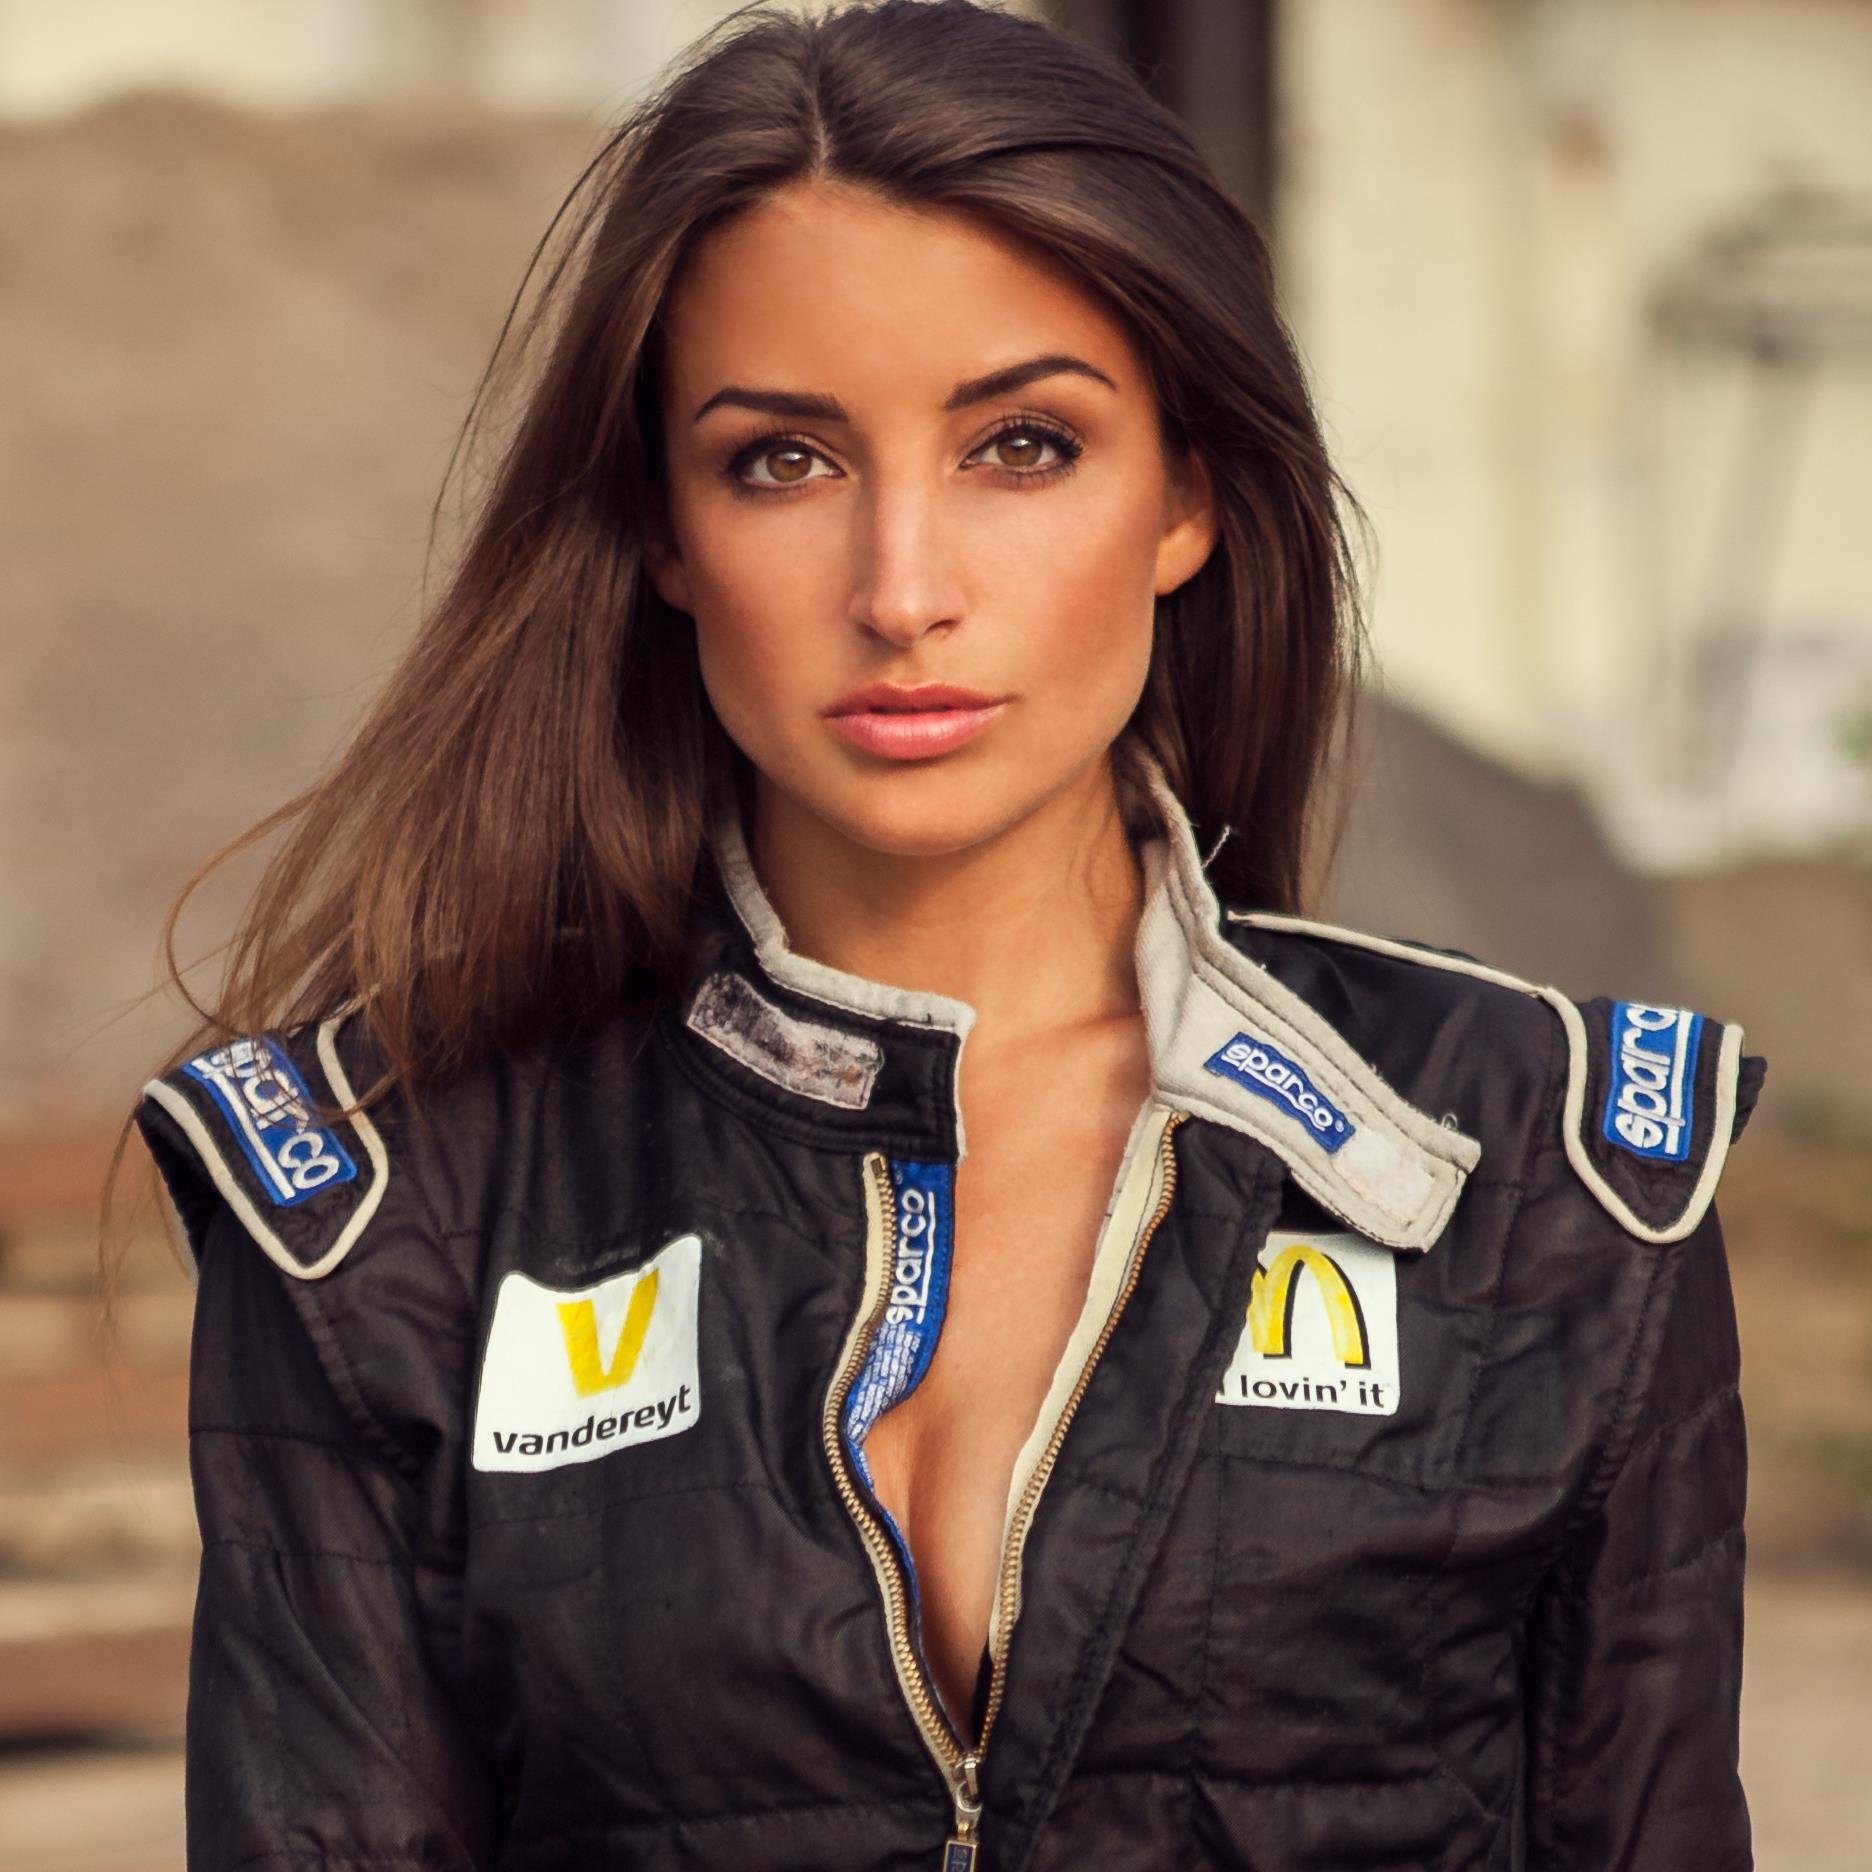 Racing Driver - Driver Manager - Model